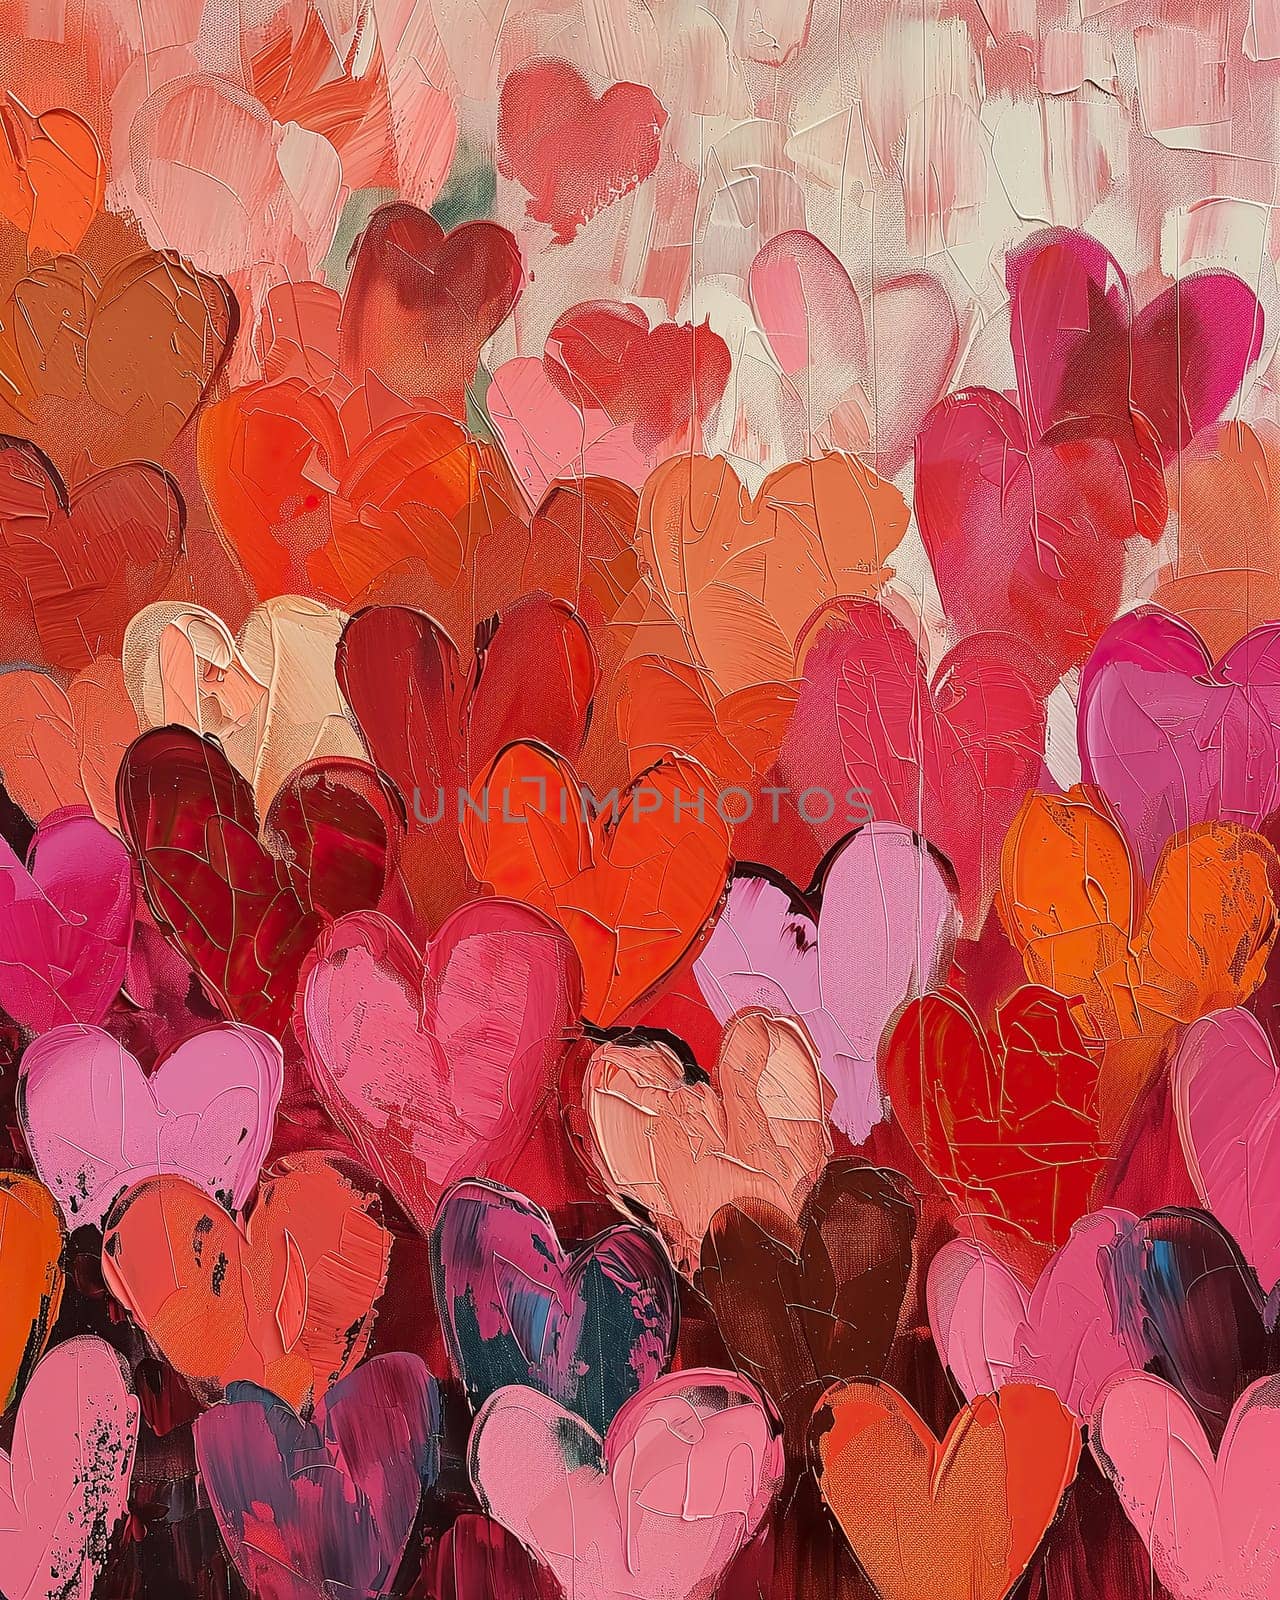 A vibrant abstract painting featuring various shades of red and pink hearts against a soft textured background. Perfect for themes of love, romance, and Valentine’s Day